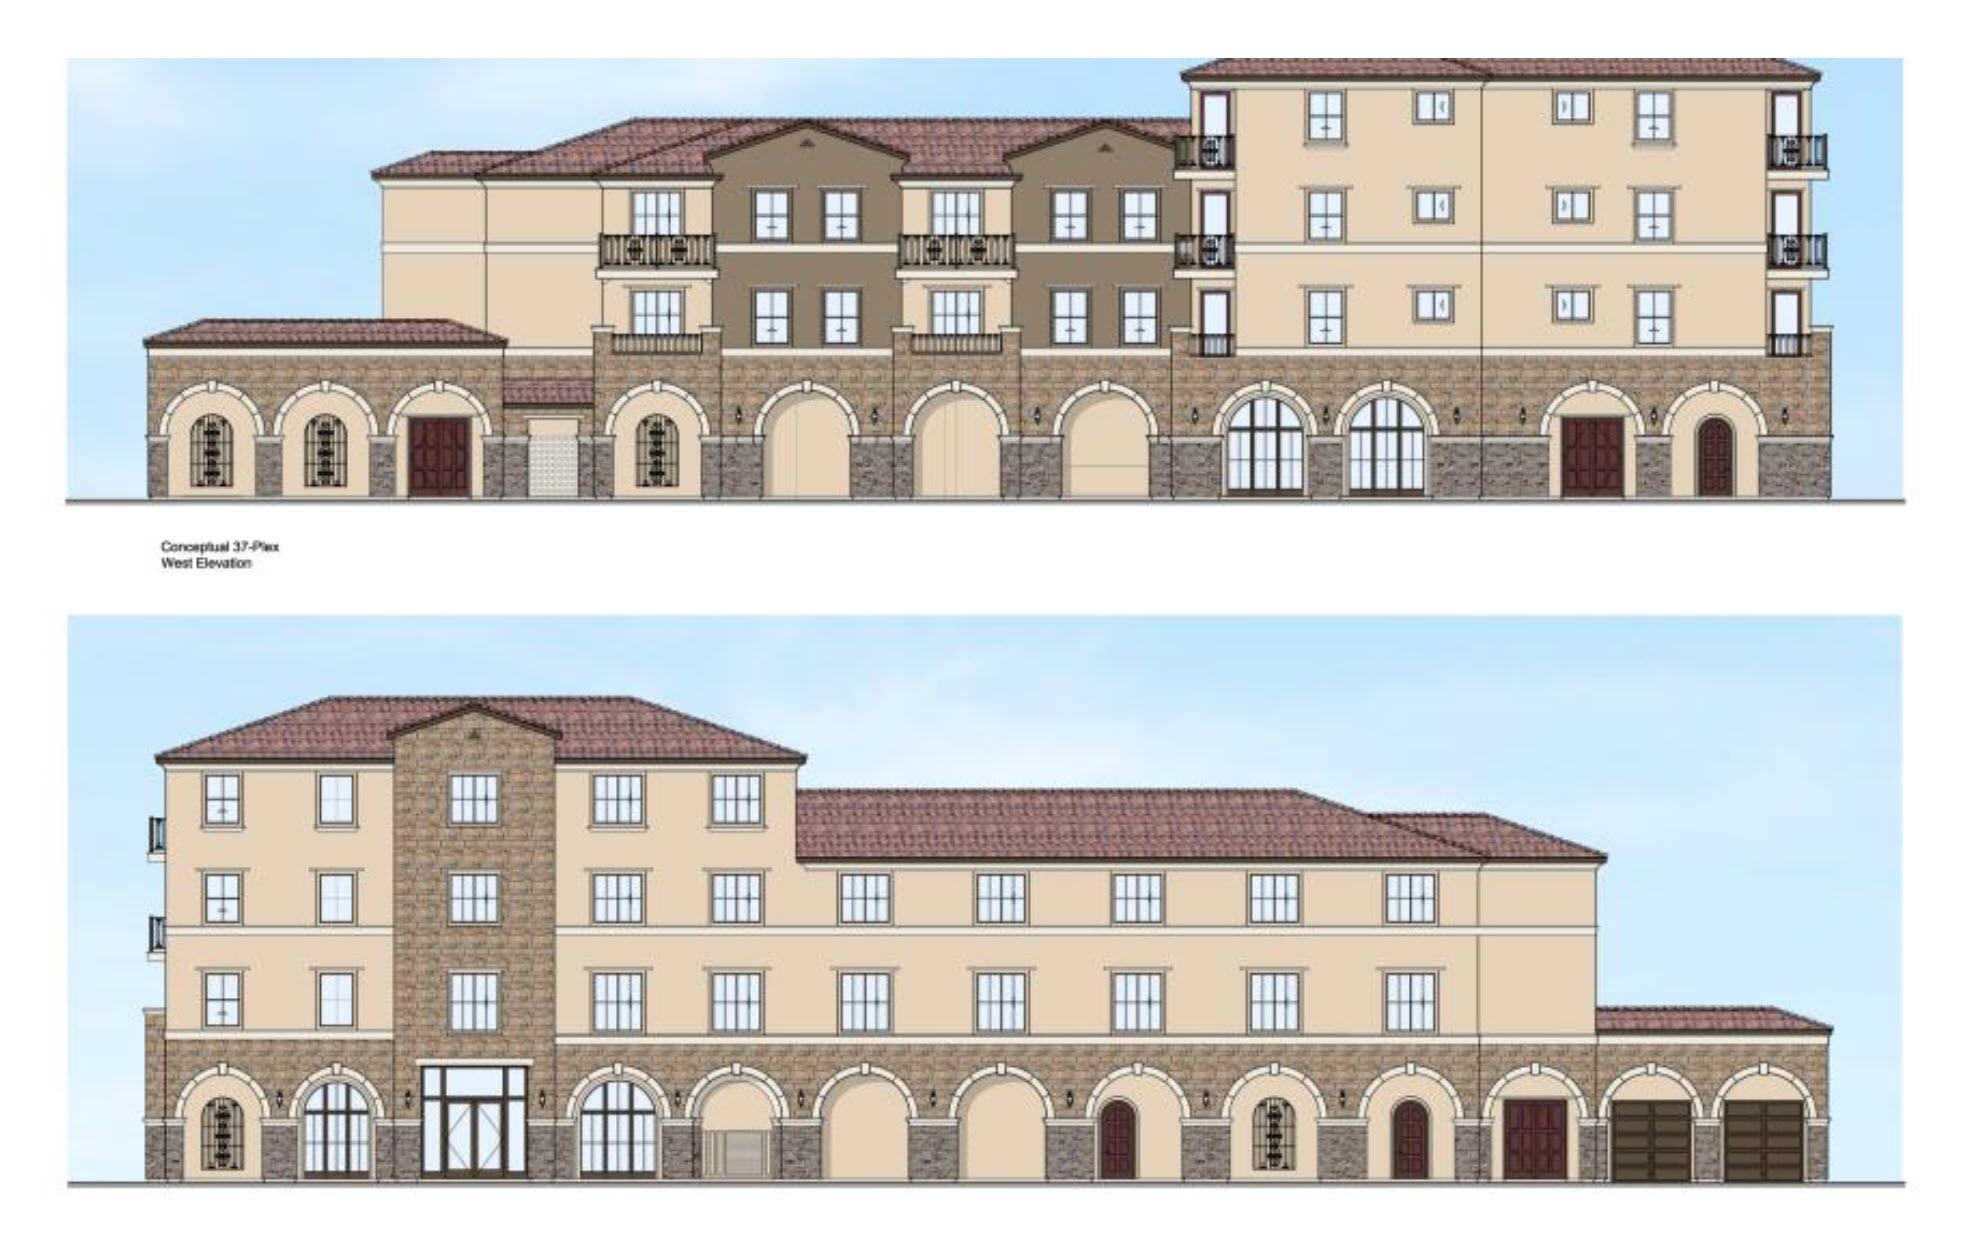 More information about "Westpark W 16 - Townhomes"